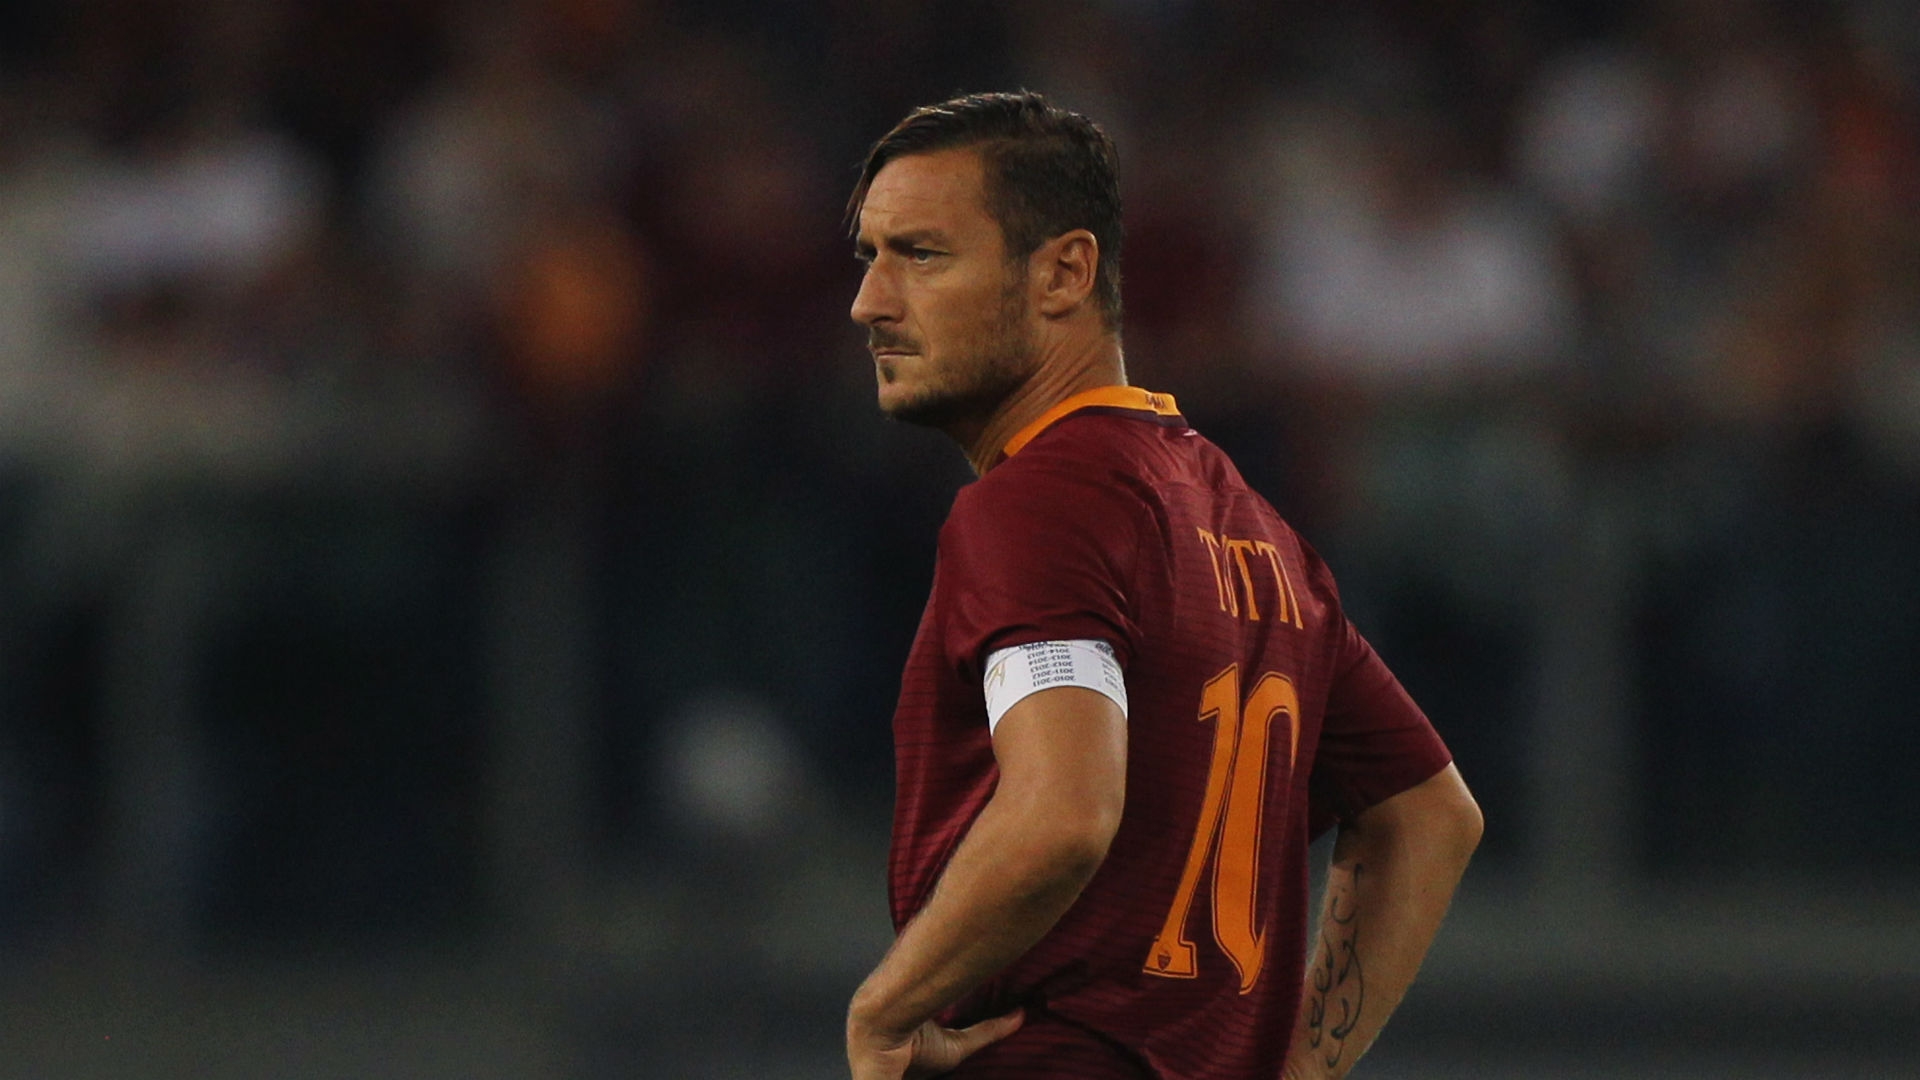 Francesco Totti has hinted towards the fact that the game against Genoa may be his last